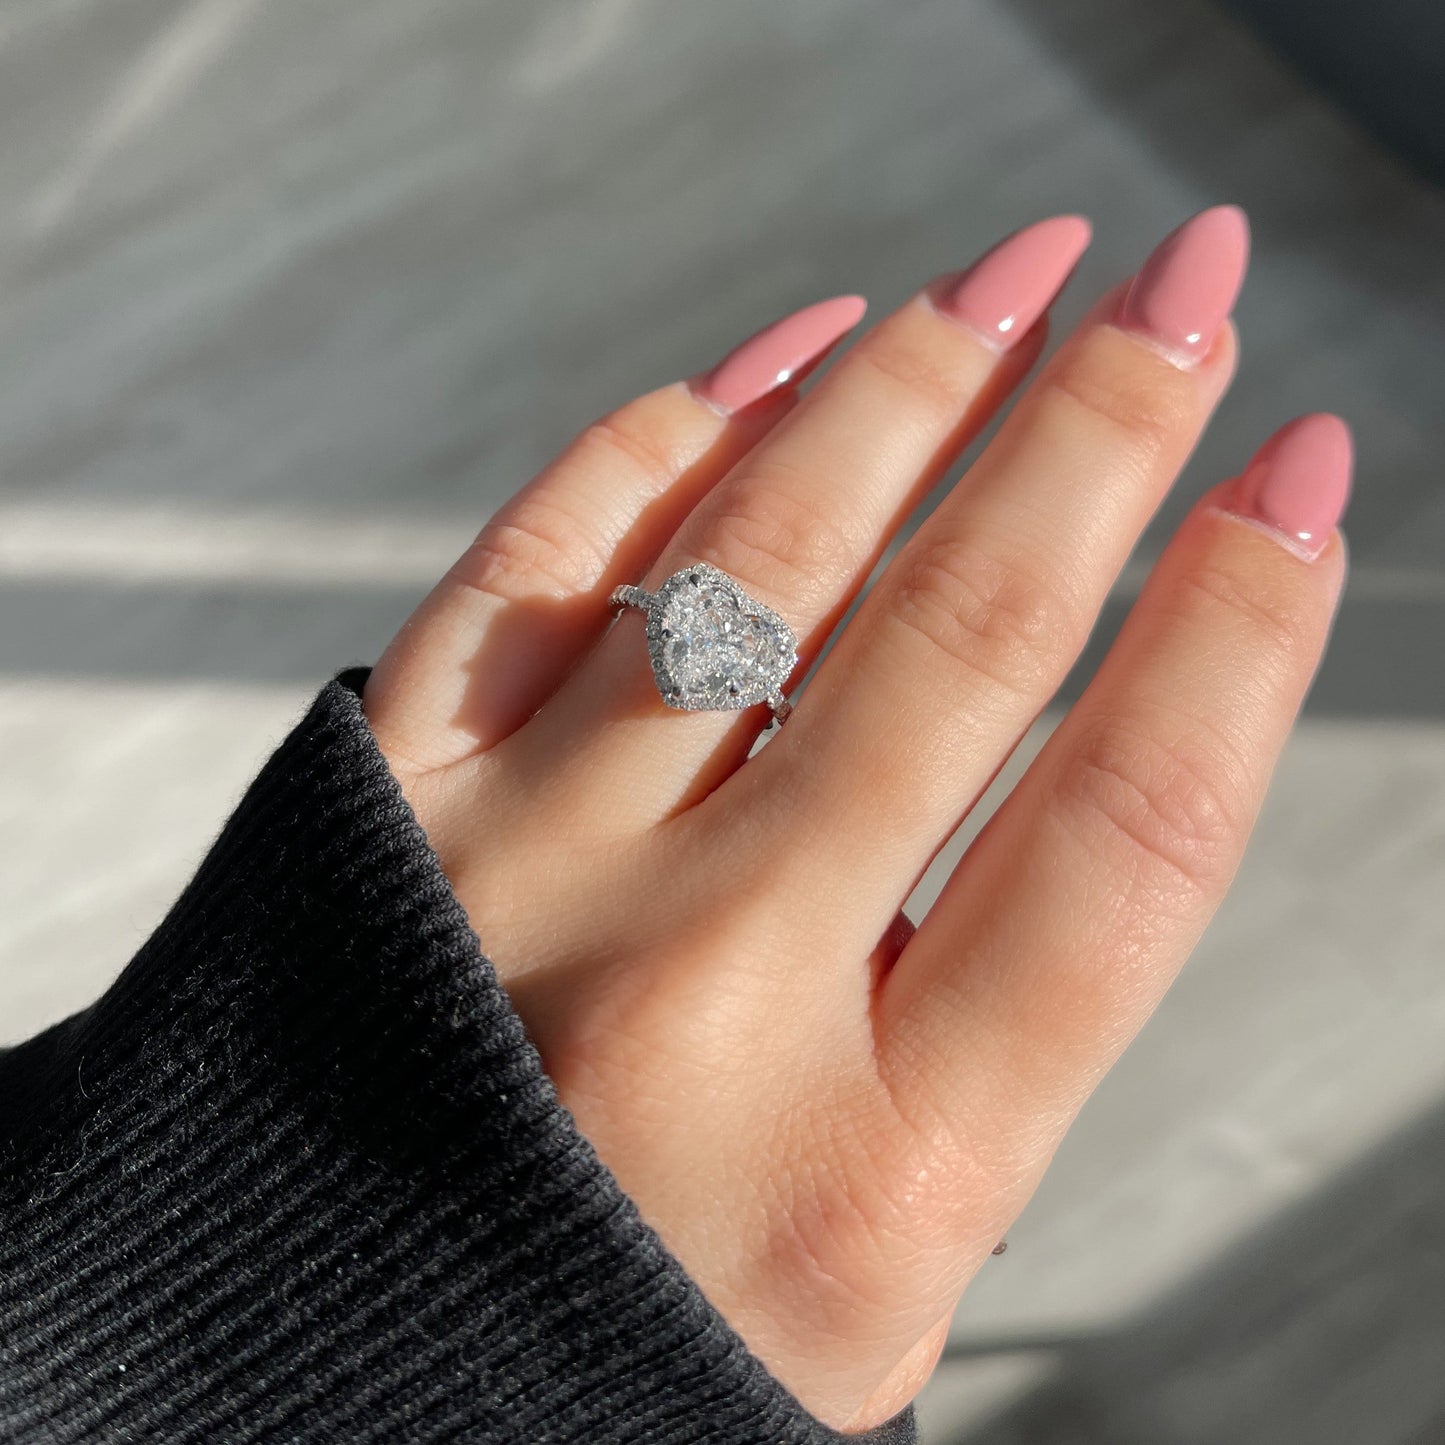 Anna Kournikova, Fancy Pink Pear Shape Engagement Ring, 8 Carats, | Faux Diamond  Engagement & Cocktail Rings Online by Margalit Rings – MargalitRings